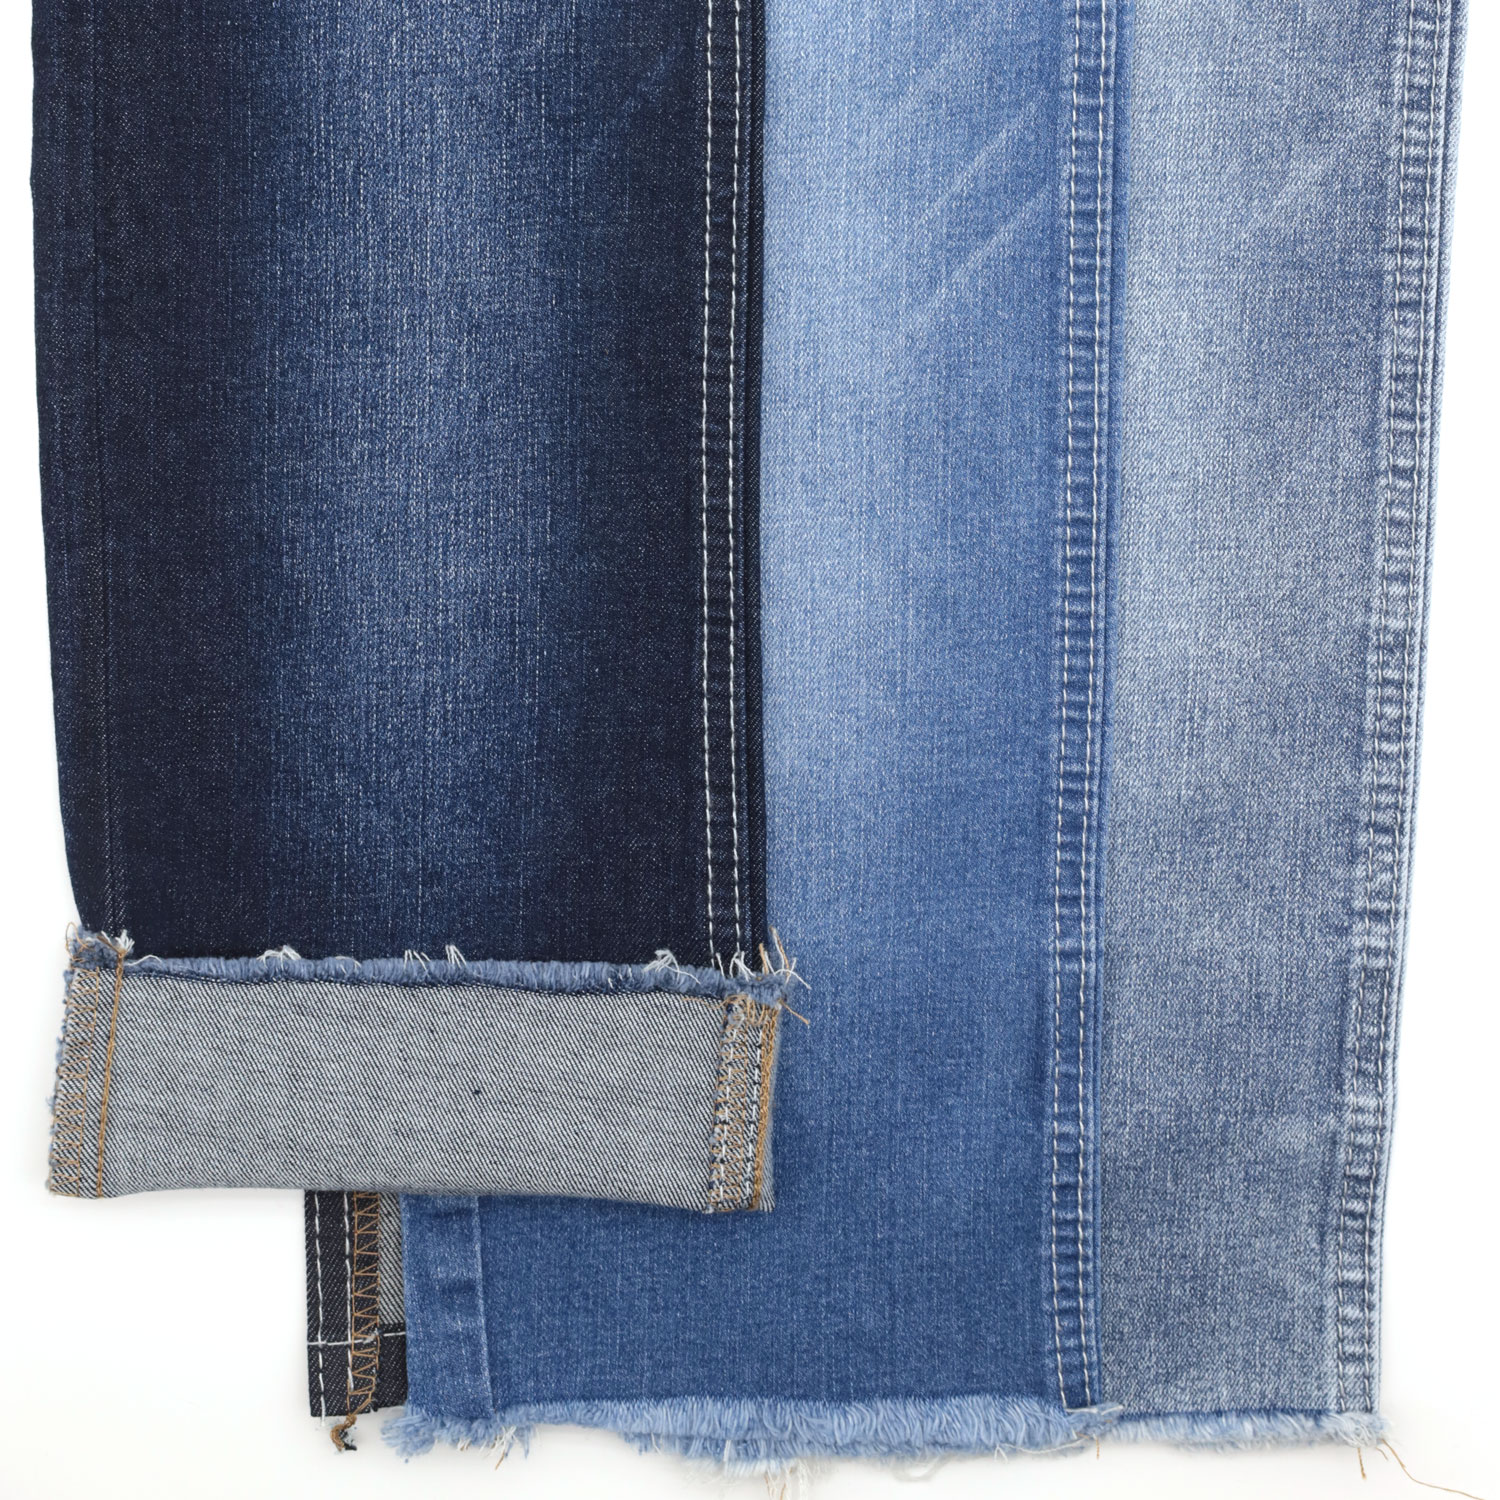 How to Find Best China Denim Fabric Products 1